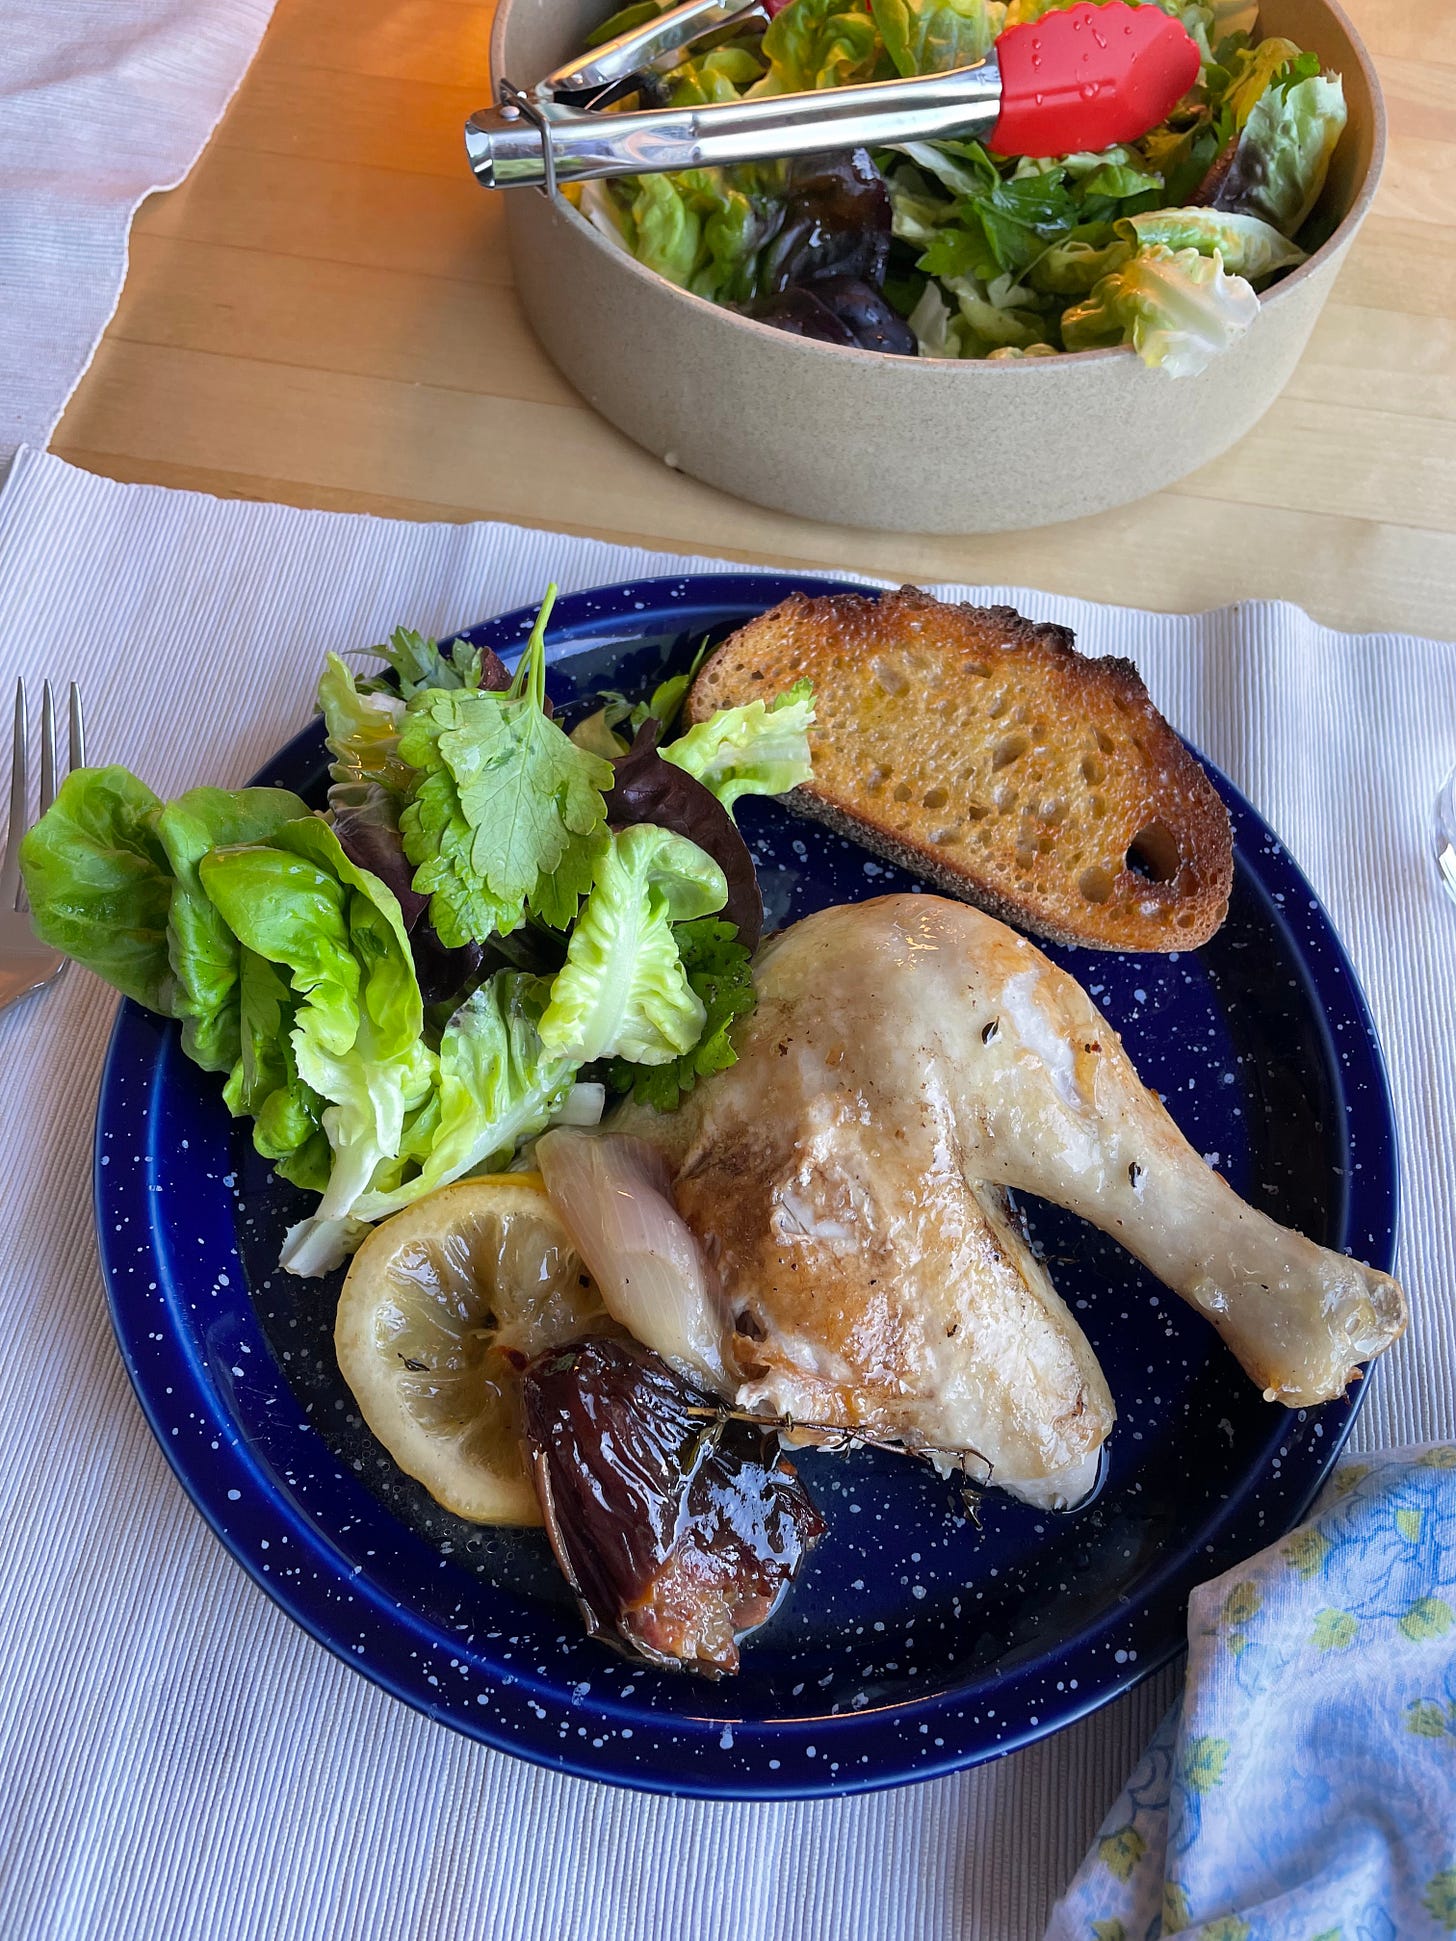 A speckled plate with a green herby salad, and a chicken thigh and drumstick, with a sticky date and buttered toast sitting alongside it. A ceramic bowl of green salad in the background.